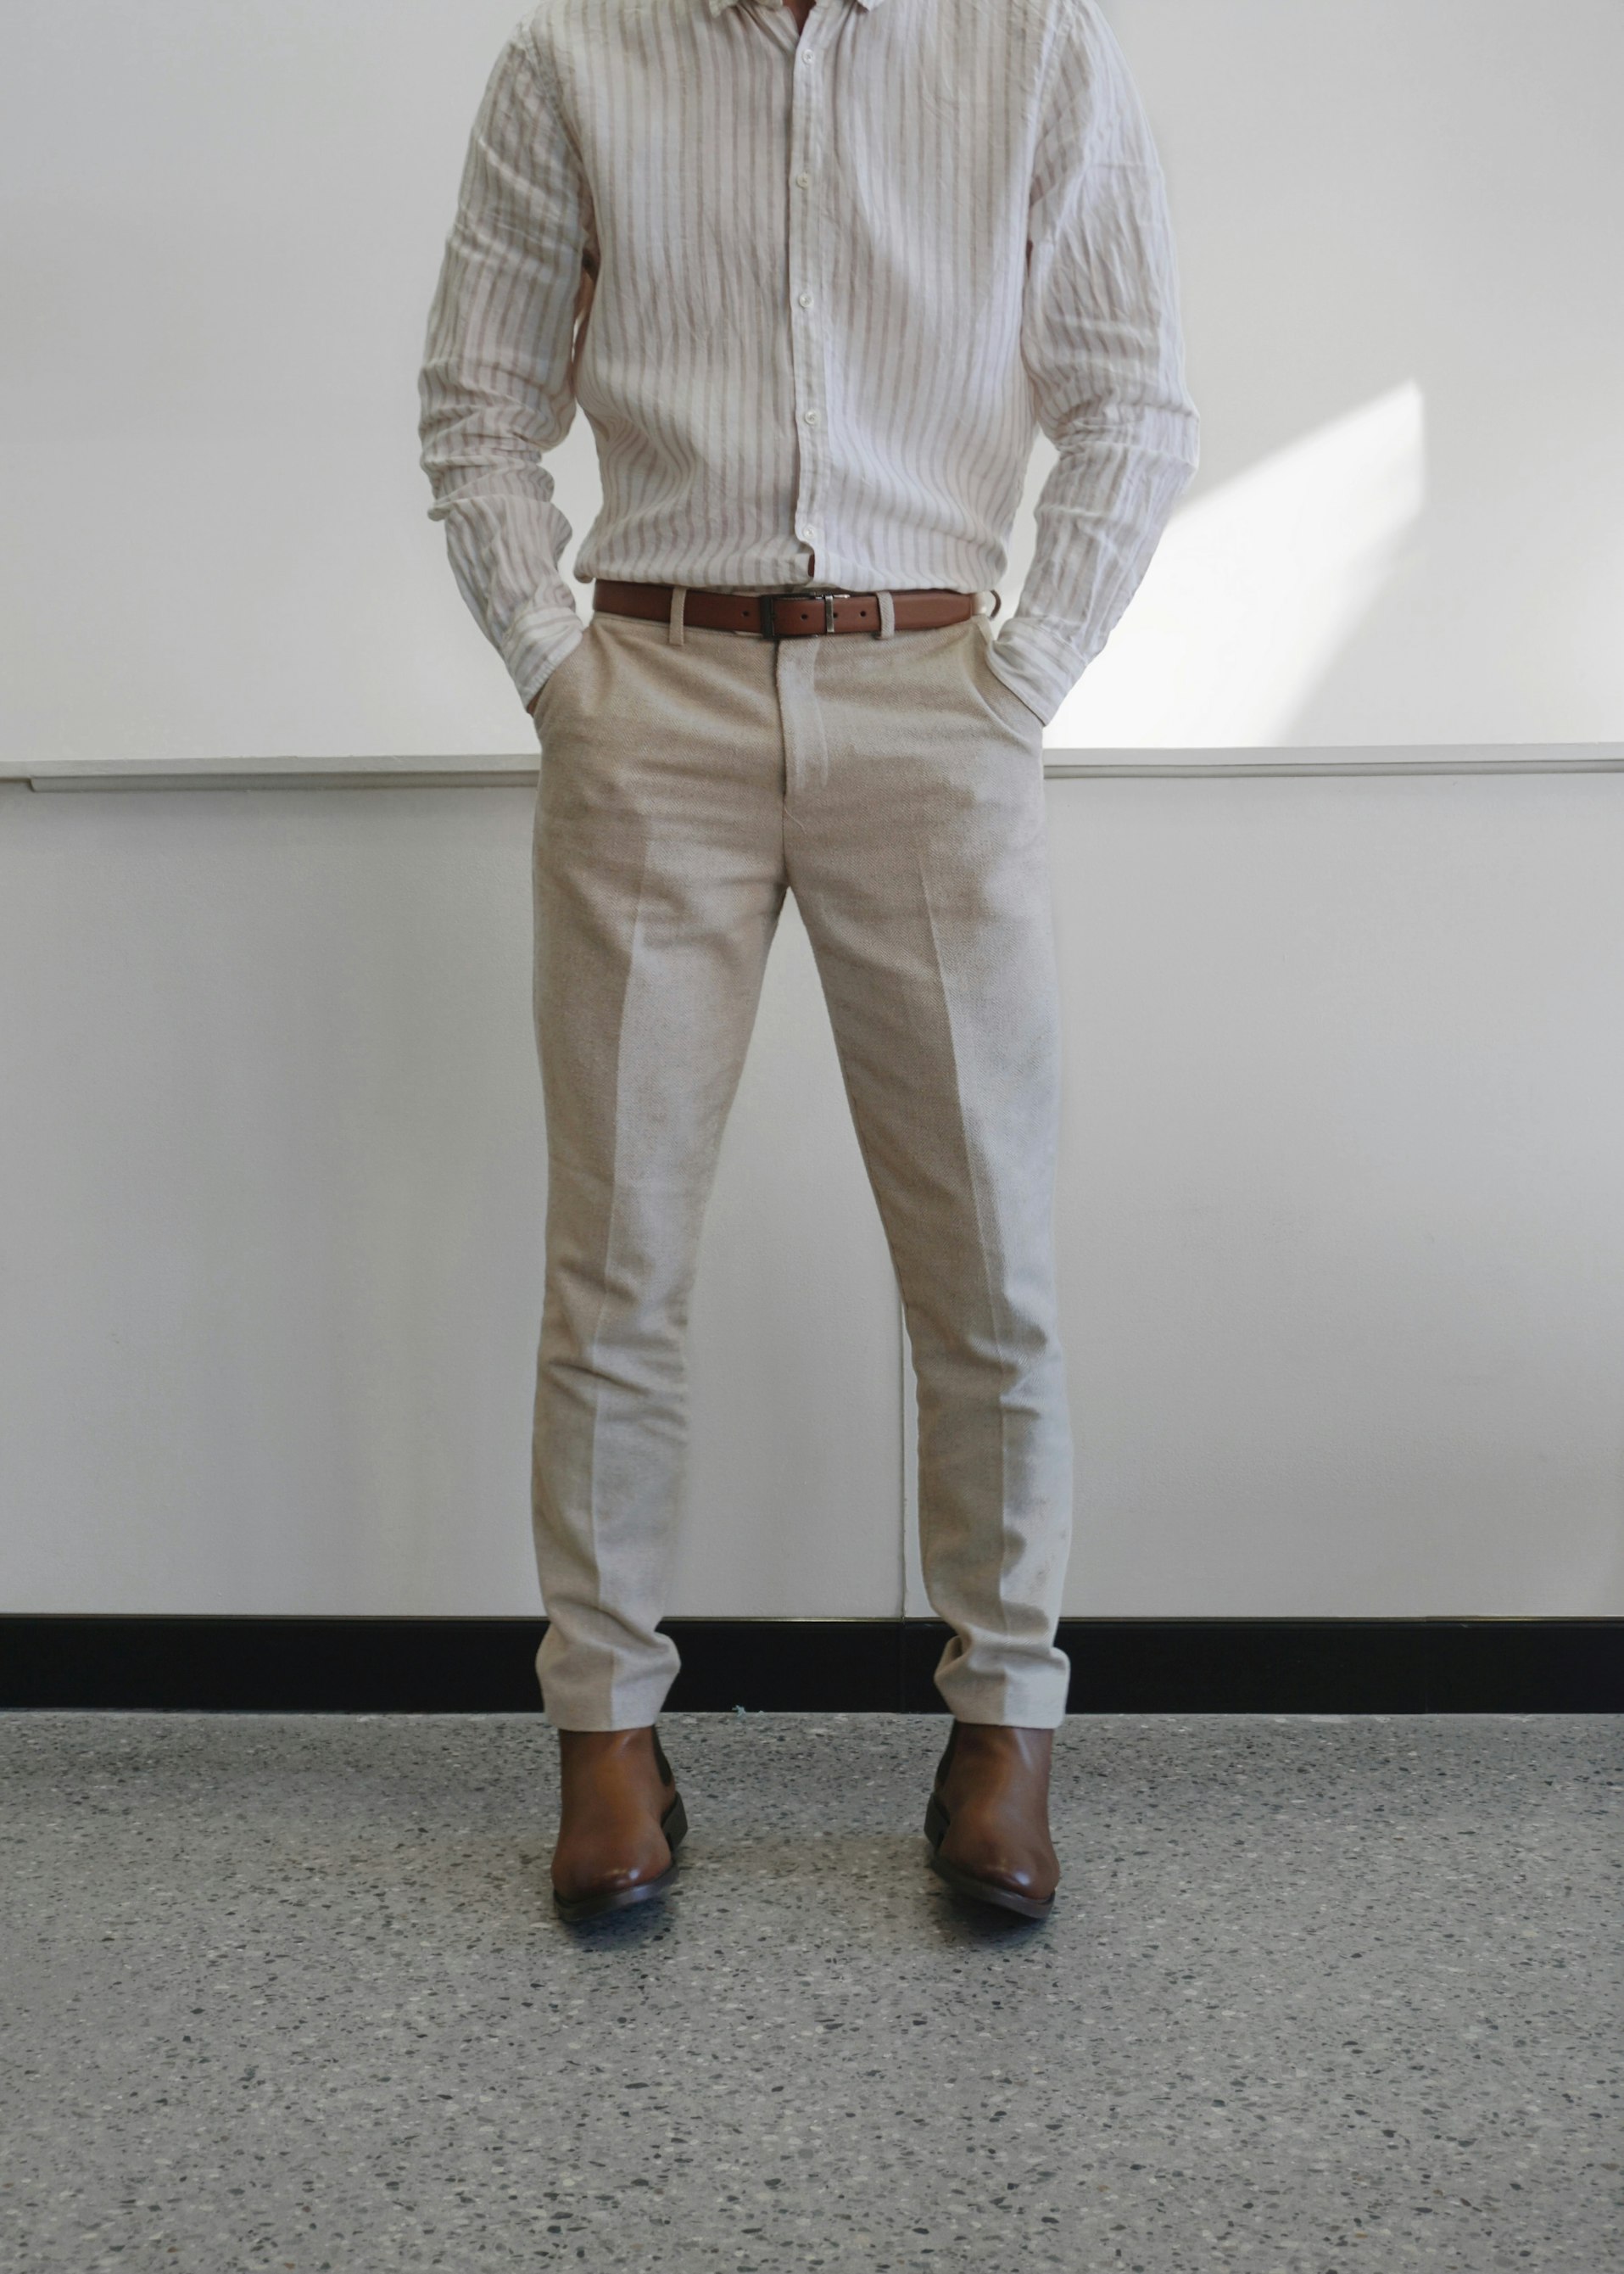 What Color Shirt Goes With Khaki Pants? 5 Best Colors Found!